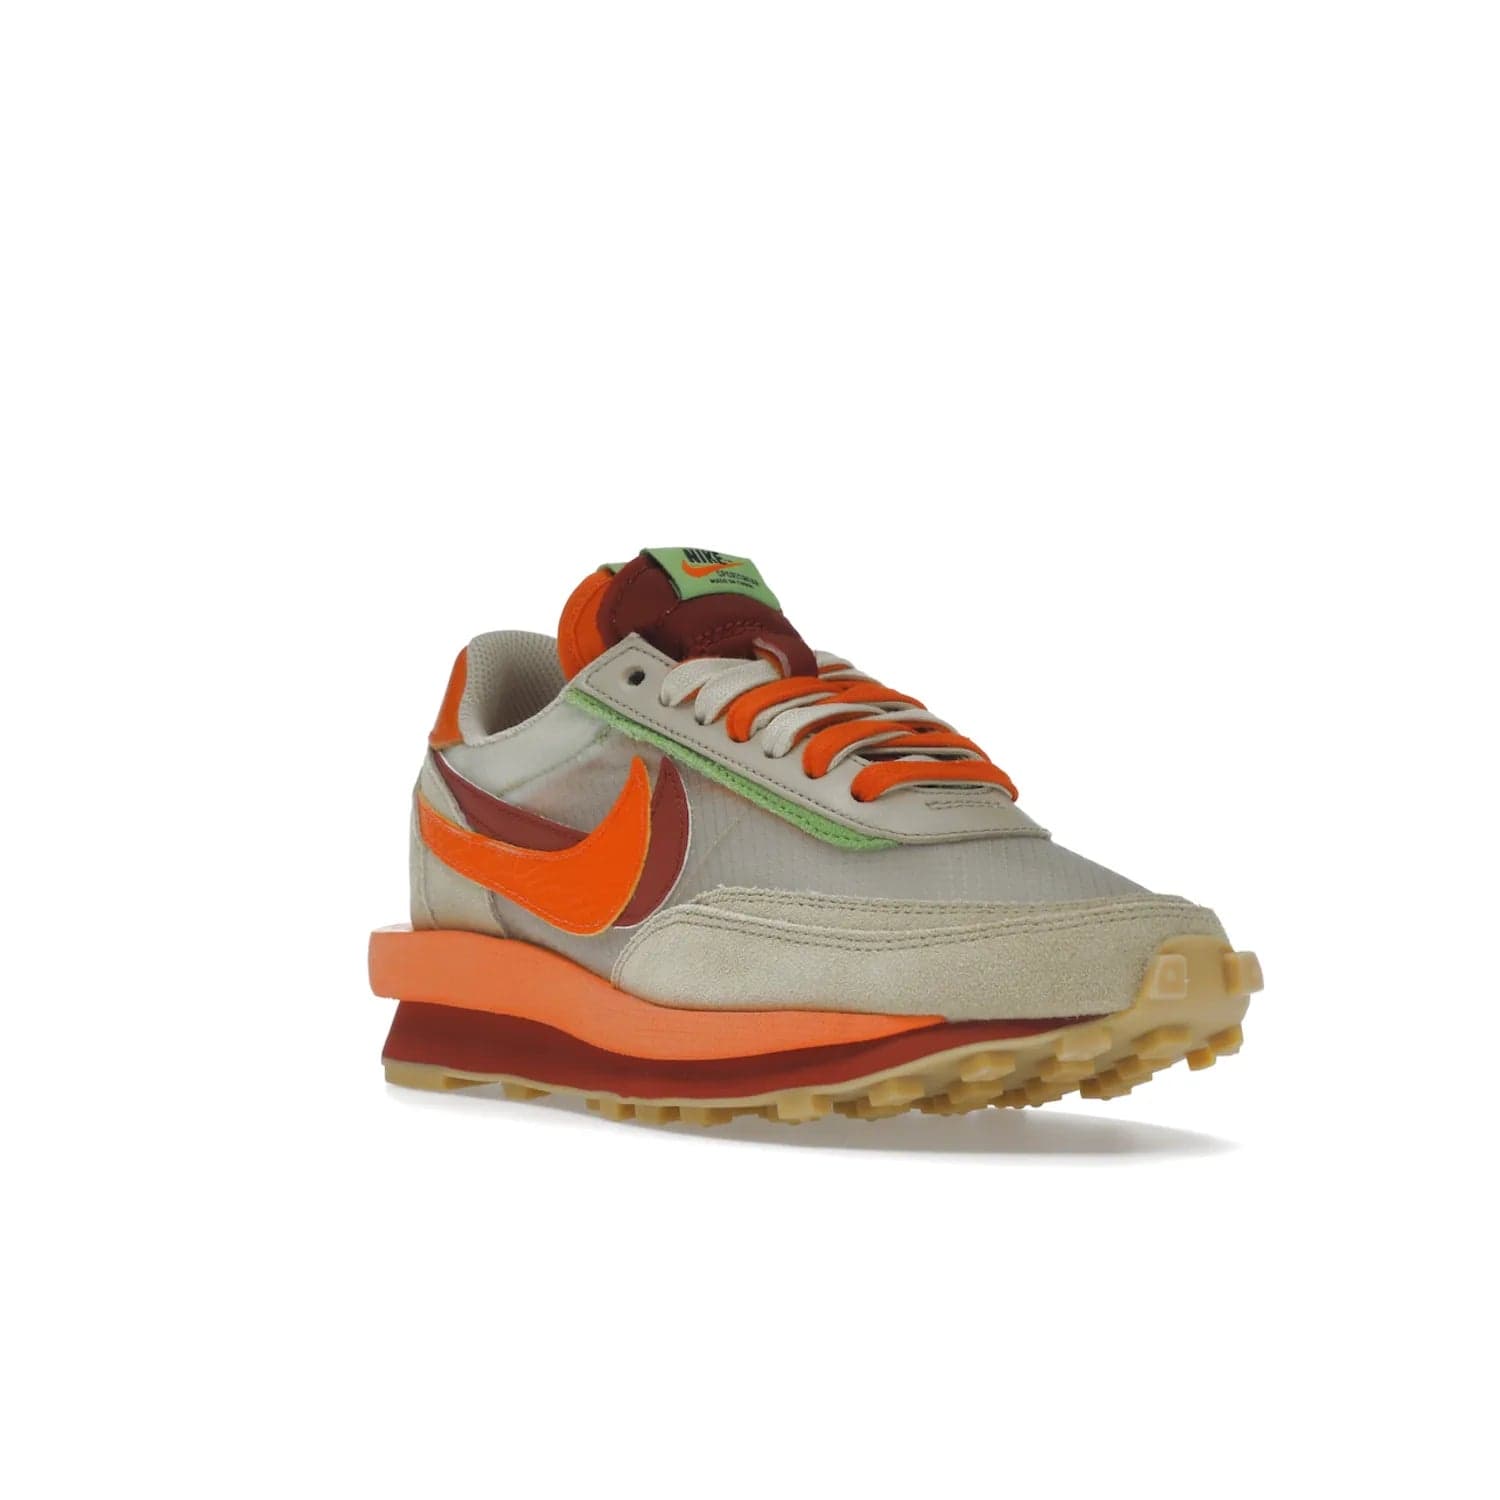 Nike LD Waffle sacai CLOT Kiss of Death Net Orange Blaze - Image 6 - Only at www.BallersClubKickz.com - A bold and stylish Nike LD Waffle sacai CLOT Kiss of Death Net Orange Blaze sneaker featuring a unique off-white, Deep Red & Orange Blaze Swooshes, two-toned stacked sole and doubled tongue. Available in September 2021. Make a statement.